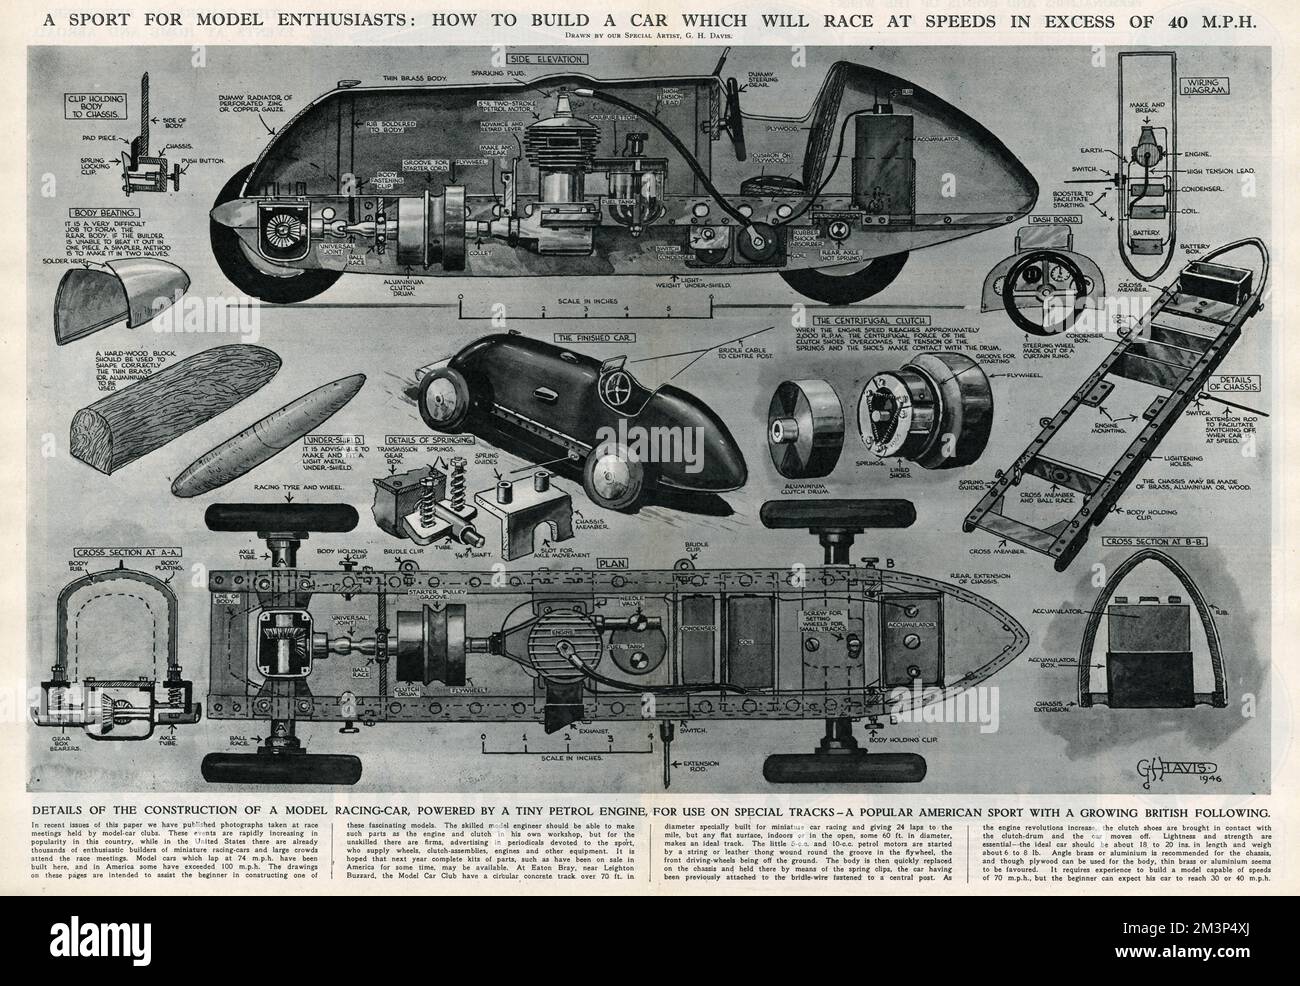 A sport for model enthusiasts: how to build a car which will race at speeds in excess of 40 mph.  Details of the construction of a model racing car, powered by a tiny petrol engine, for use on special tracks -- a popular American sport with a growing British following.      Date: 1946 Stock Photo